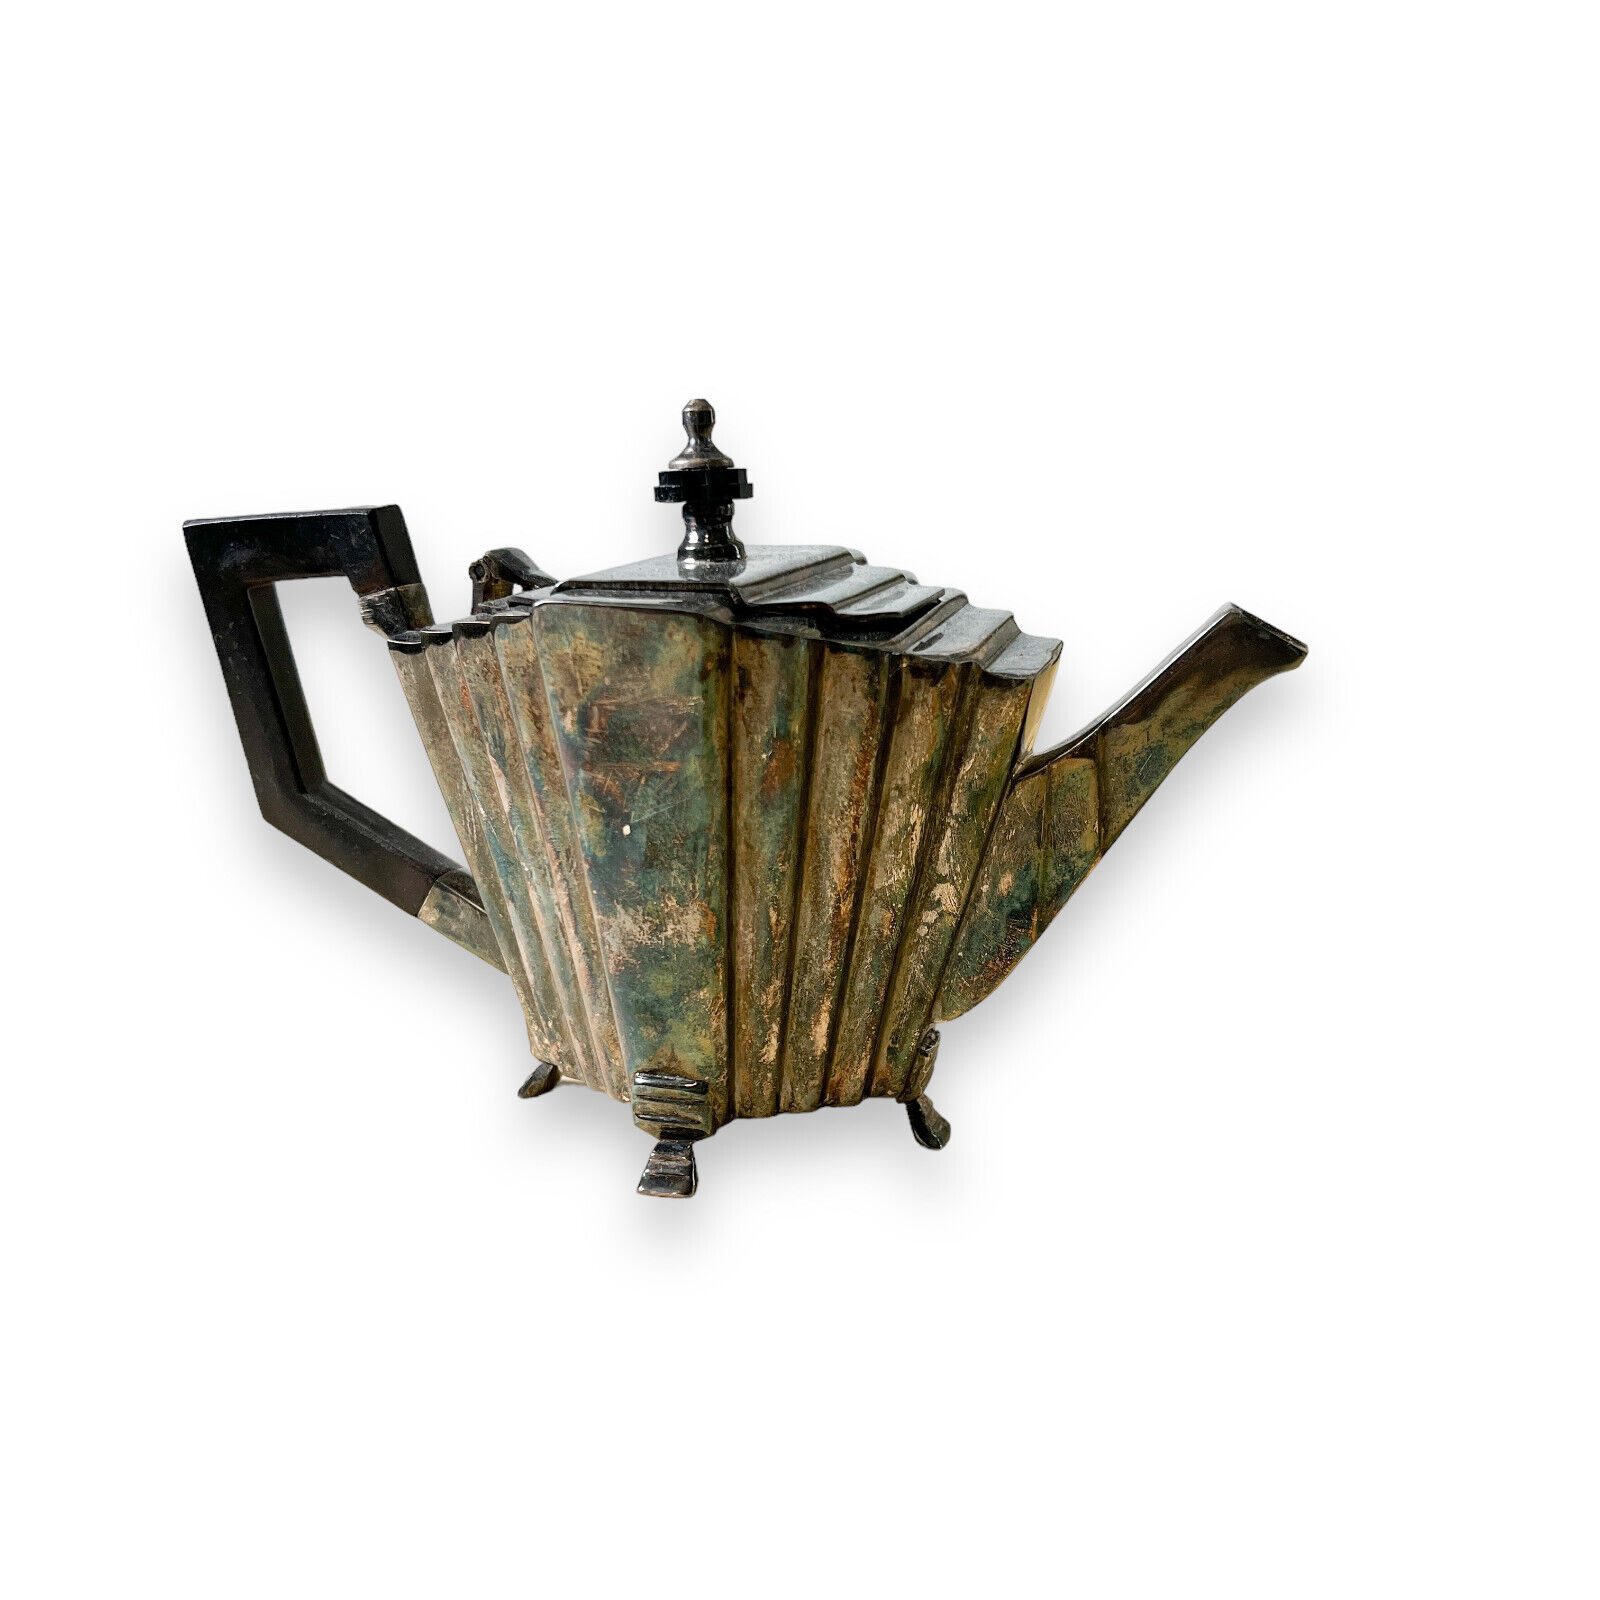 vintage hot water kettle | small/mini art deco style tea kettle | made in India